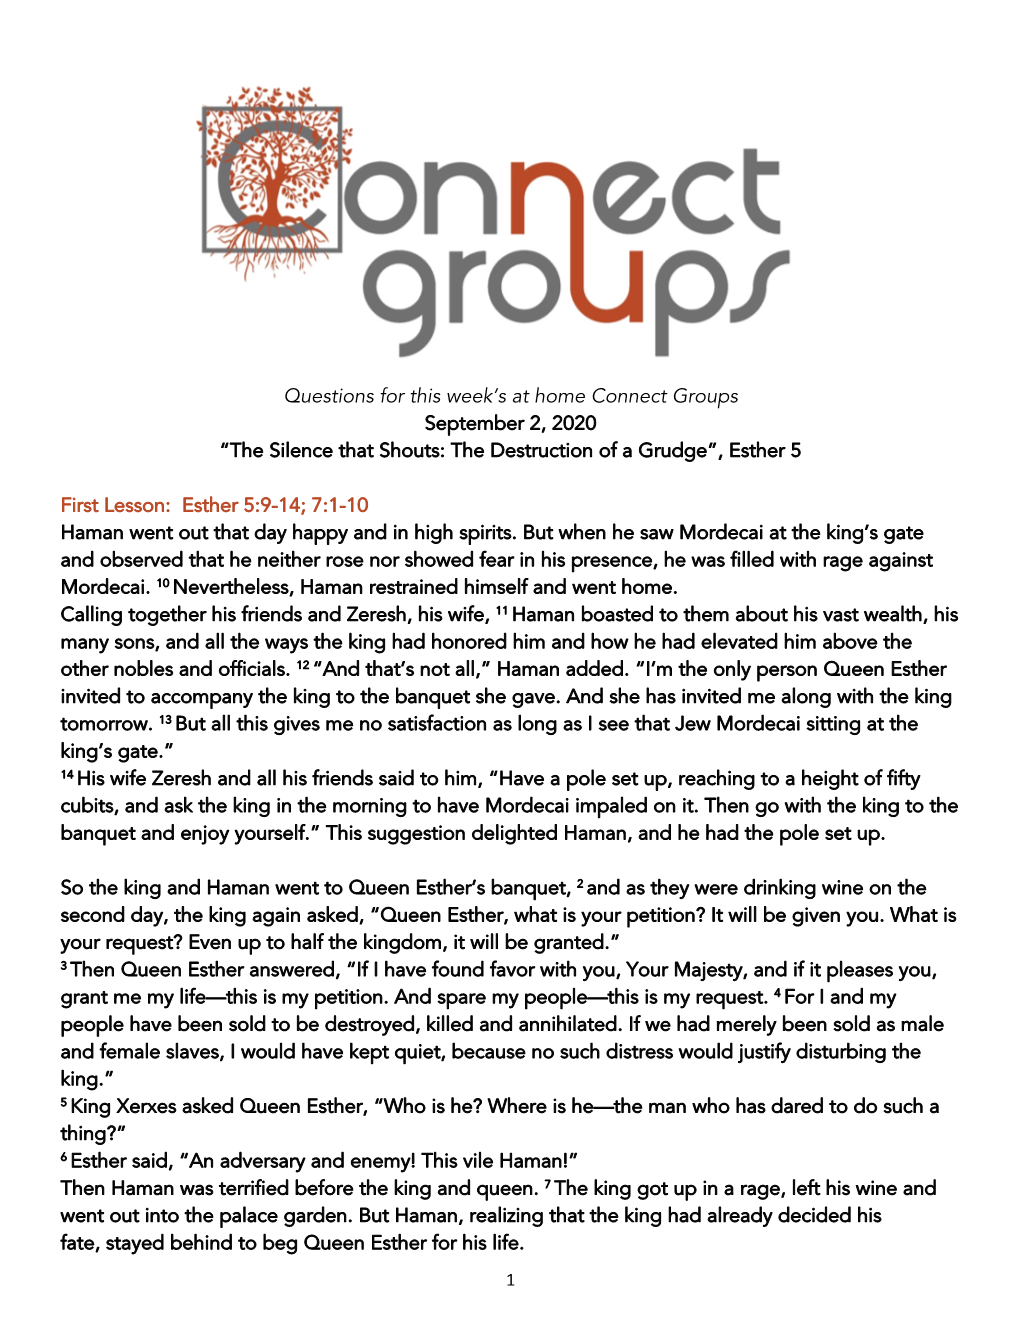 Questions for This Week's at Home Connect Groups